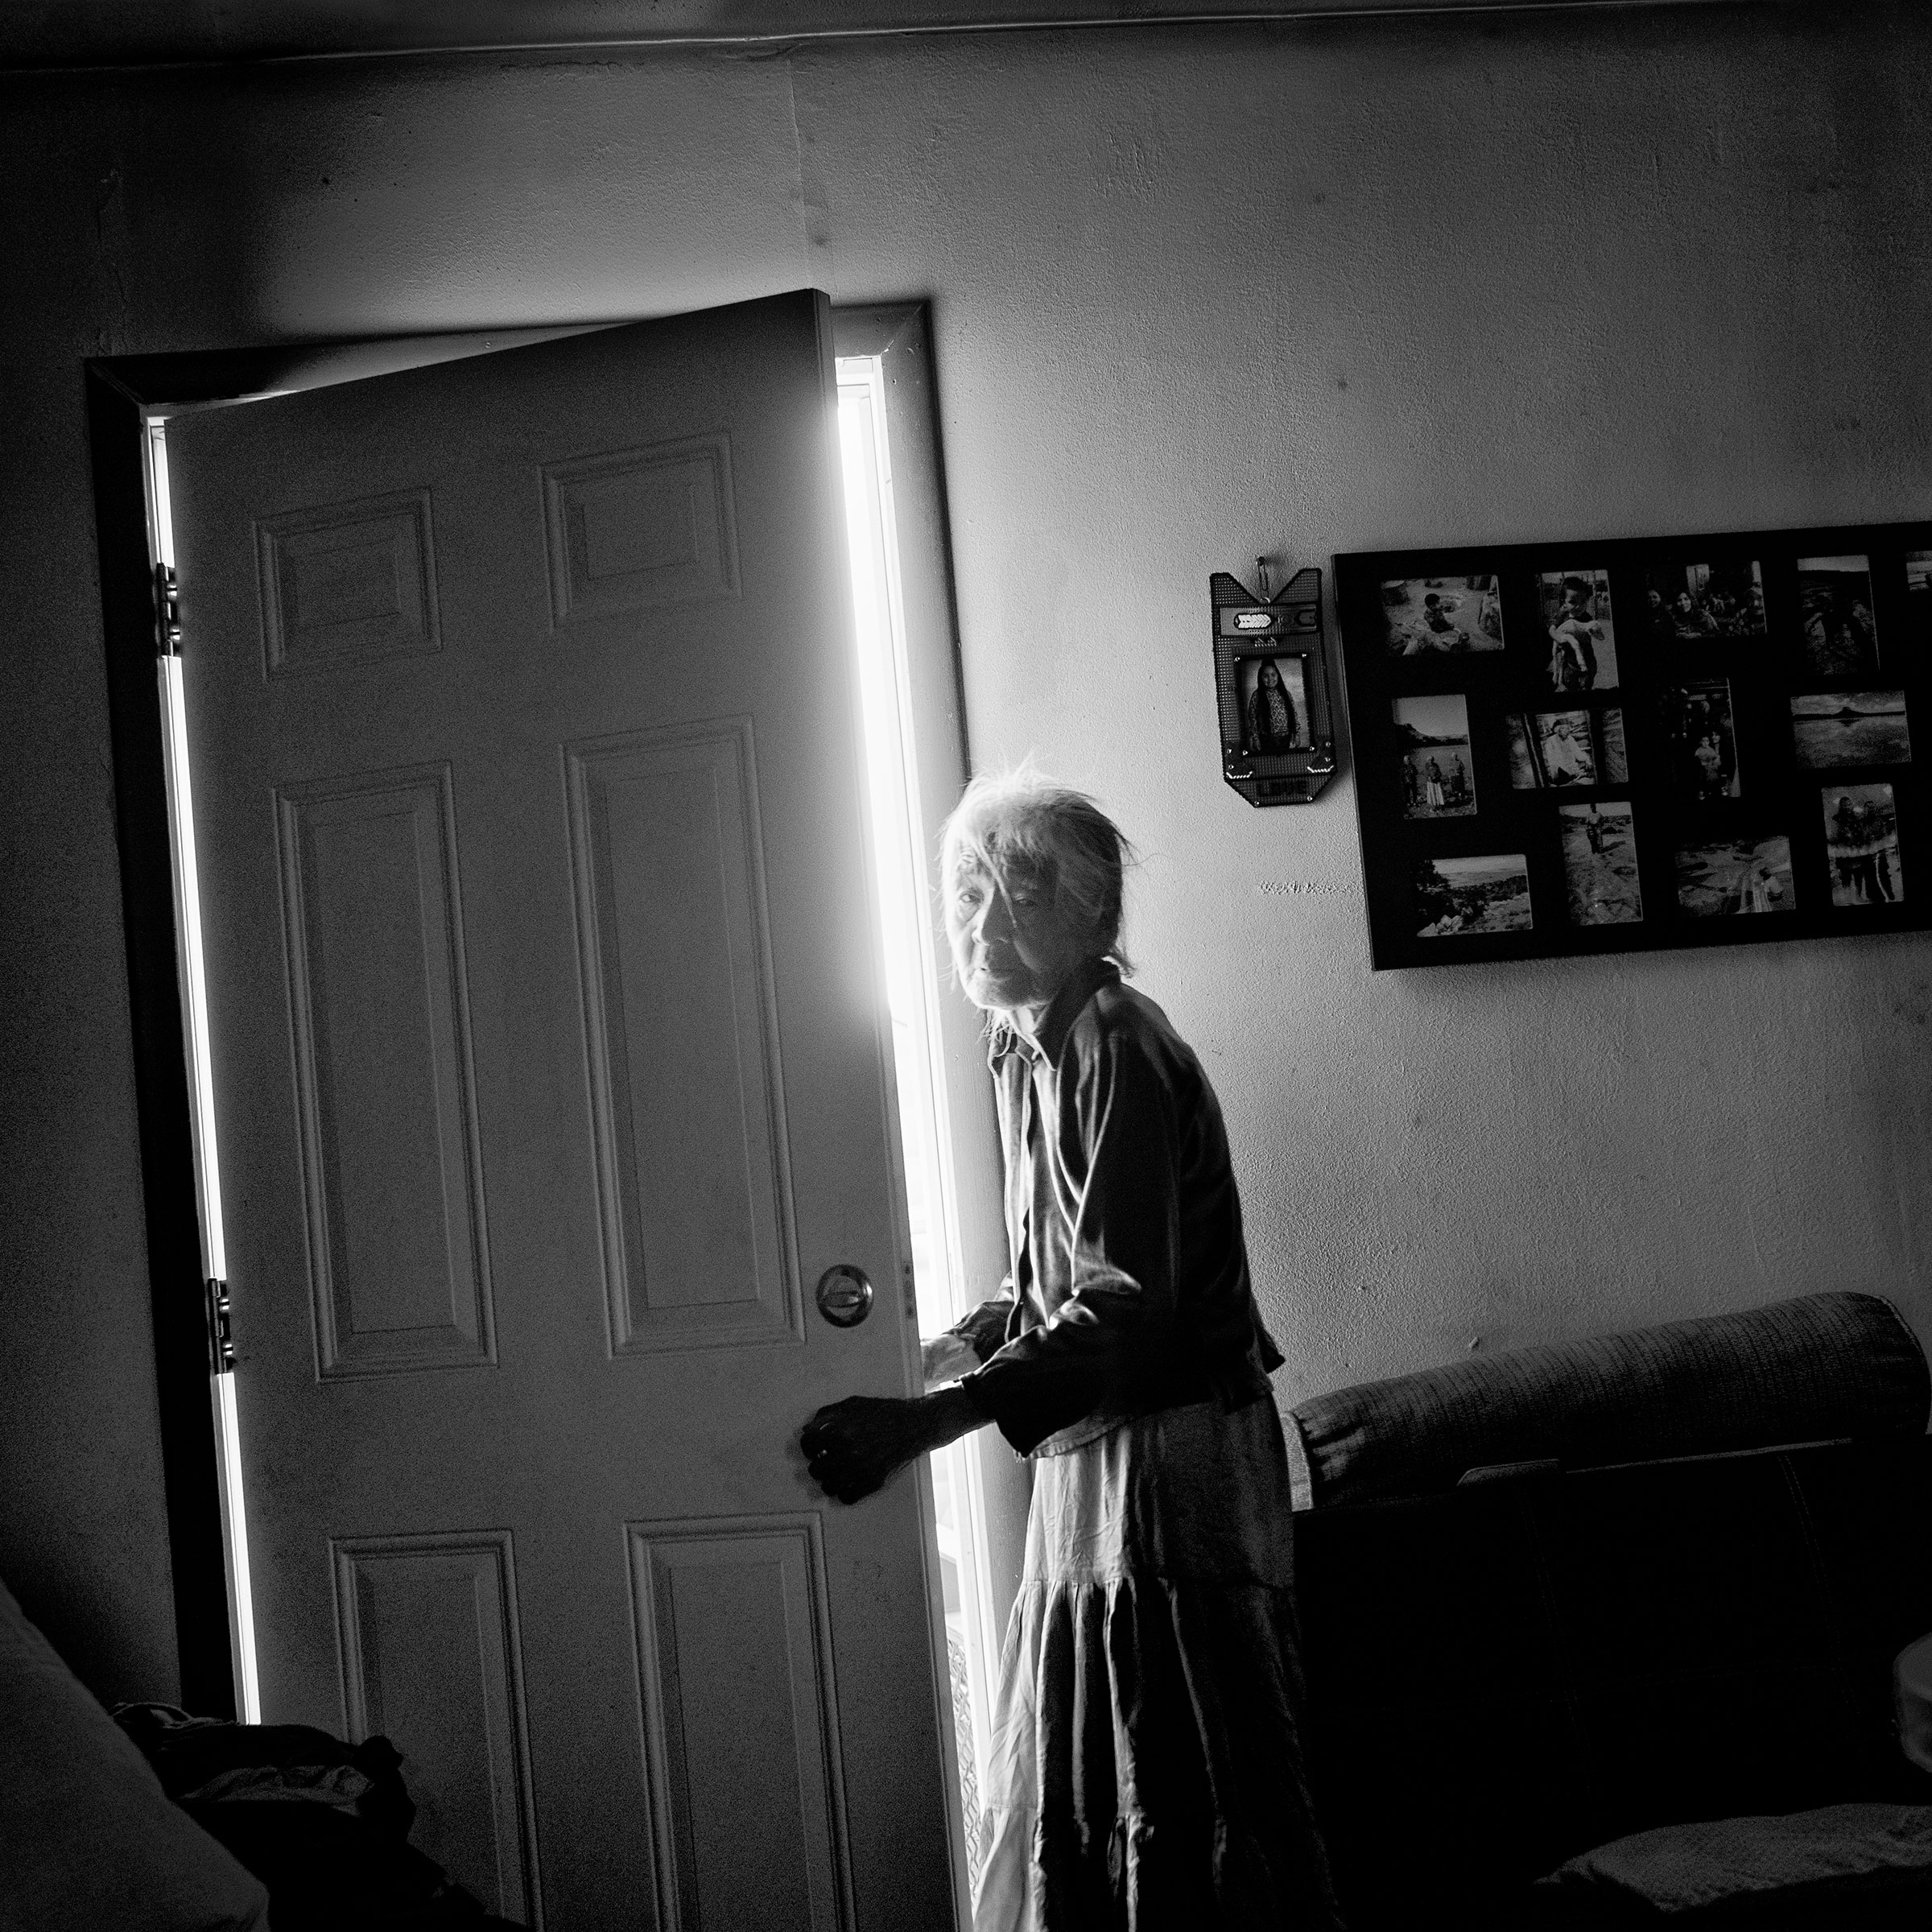 <strong>Nellie Yellowhorse</strong>, 90, at her family’s ranch home in the Navajo Nation; she lives with her two elderly sisters in the house, which has no running water. "<a href="https://time.com/longform/clean-water-access-united-states/">Tapped Out</a>," March 2 issue. (Matt Black—Magnum Photos for TIME)